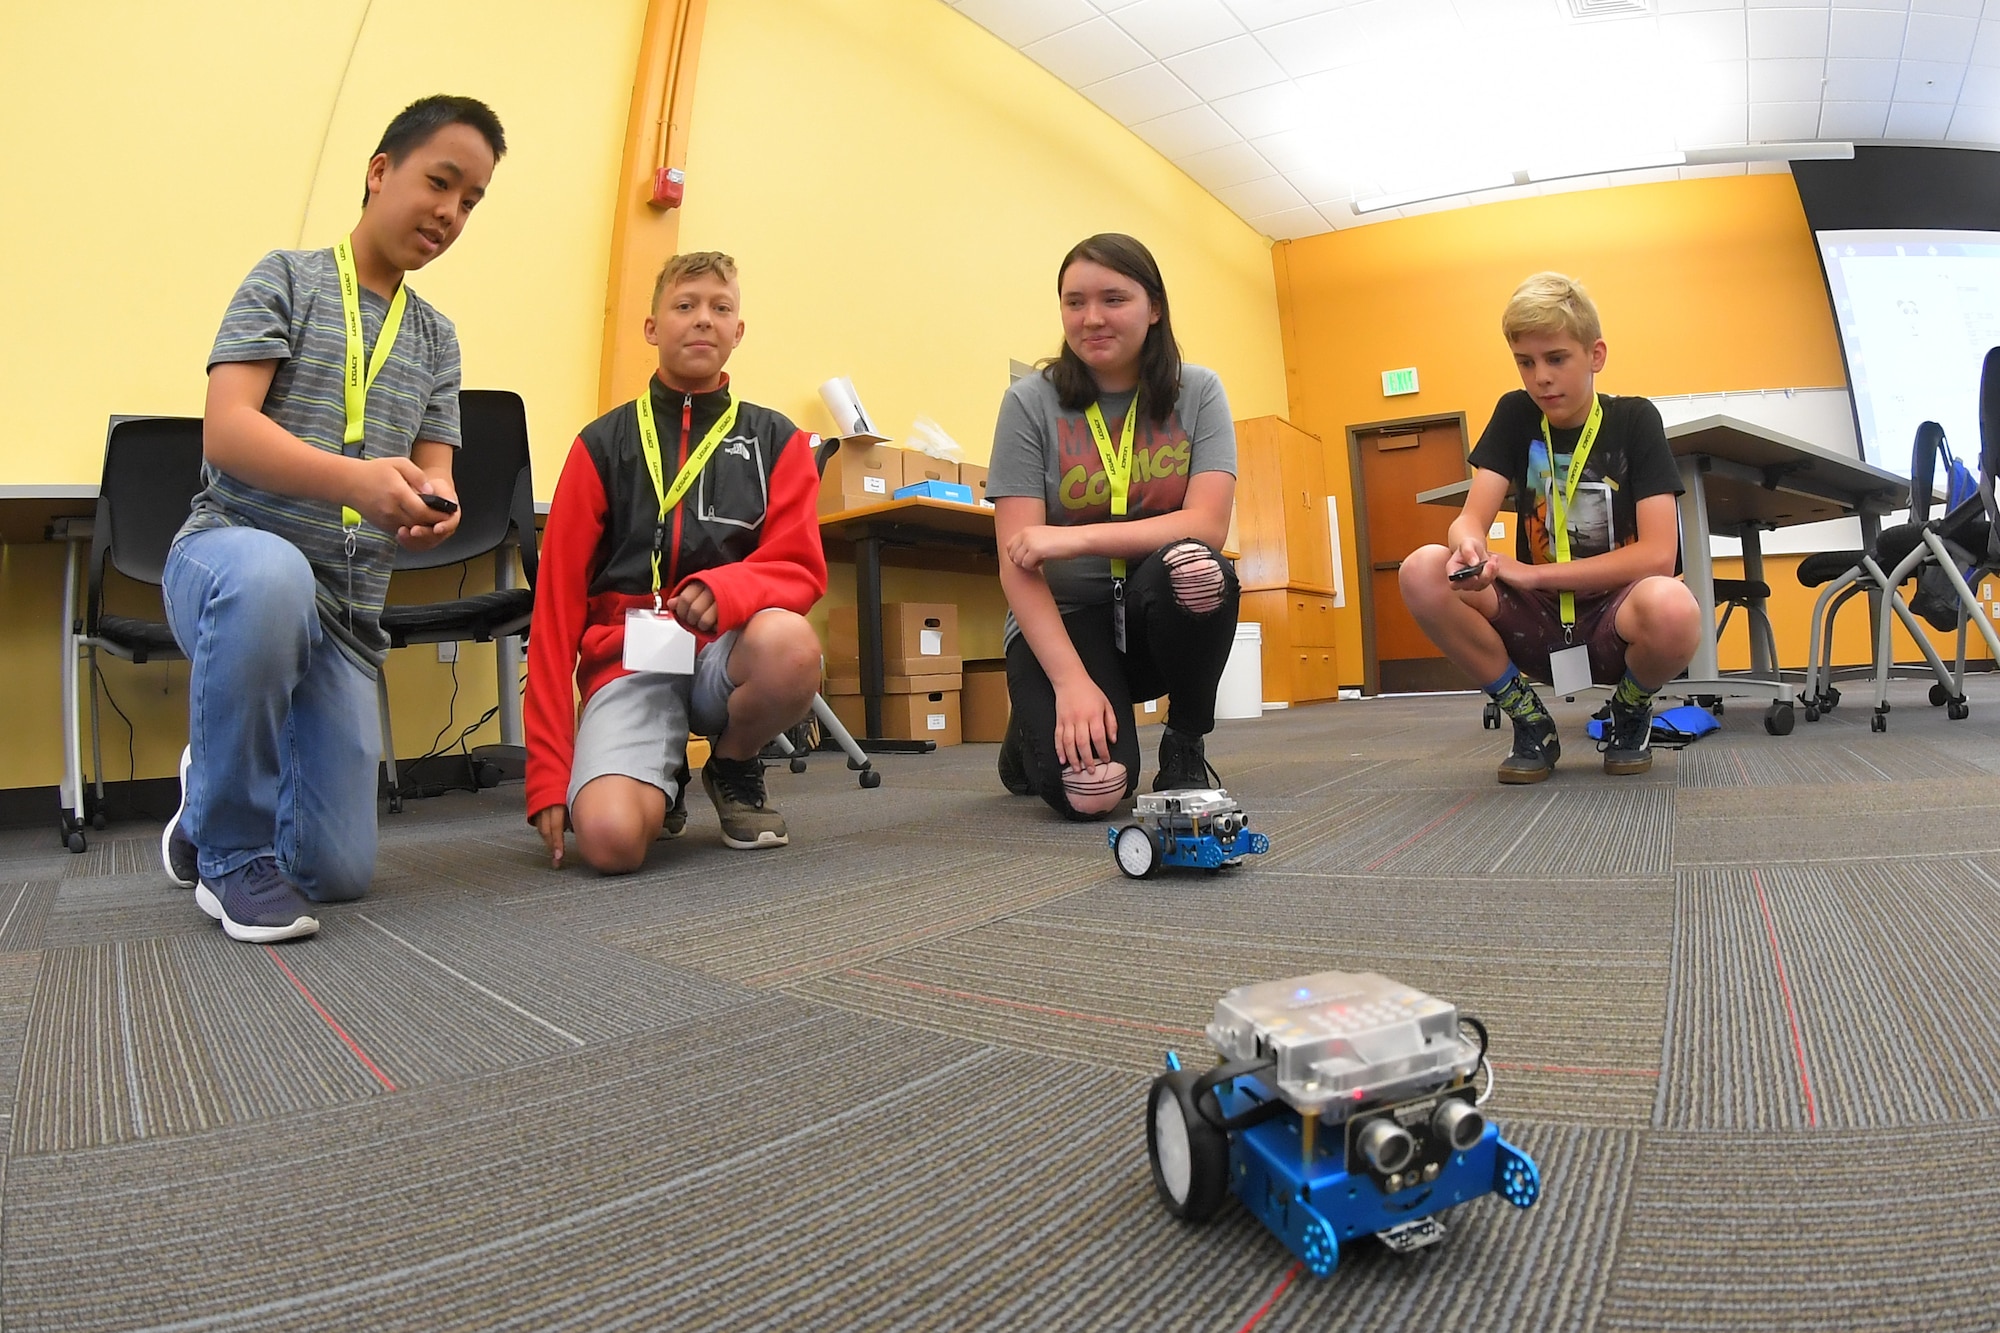 – Students test robots they programmed during a LEGACY (Leadership Experience Growing Apprenticeships Committed to Youth) program camp June 26, 2019, at the Freeport Center in Clearfield, Utah. LEGACY is an Air Force program aimed at building interest in science, technology, engineering and math (STEM) through hands-on activities while showing how STEM applies to the world. (U.S. Air Force photo by Todd Cromar)